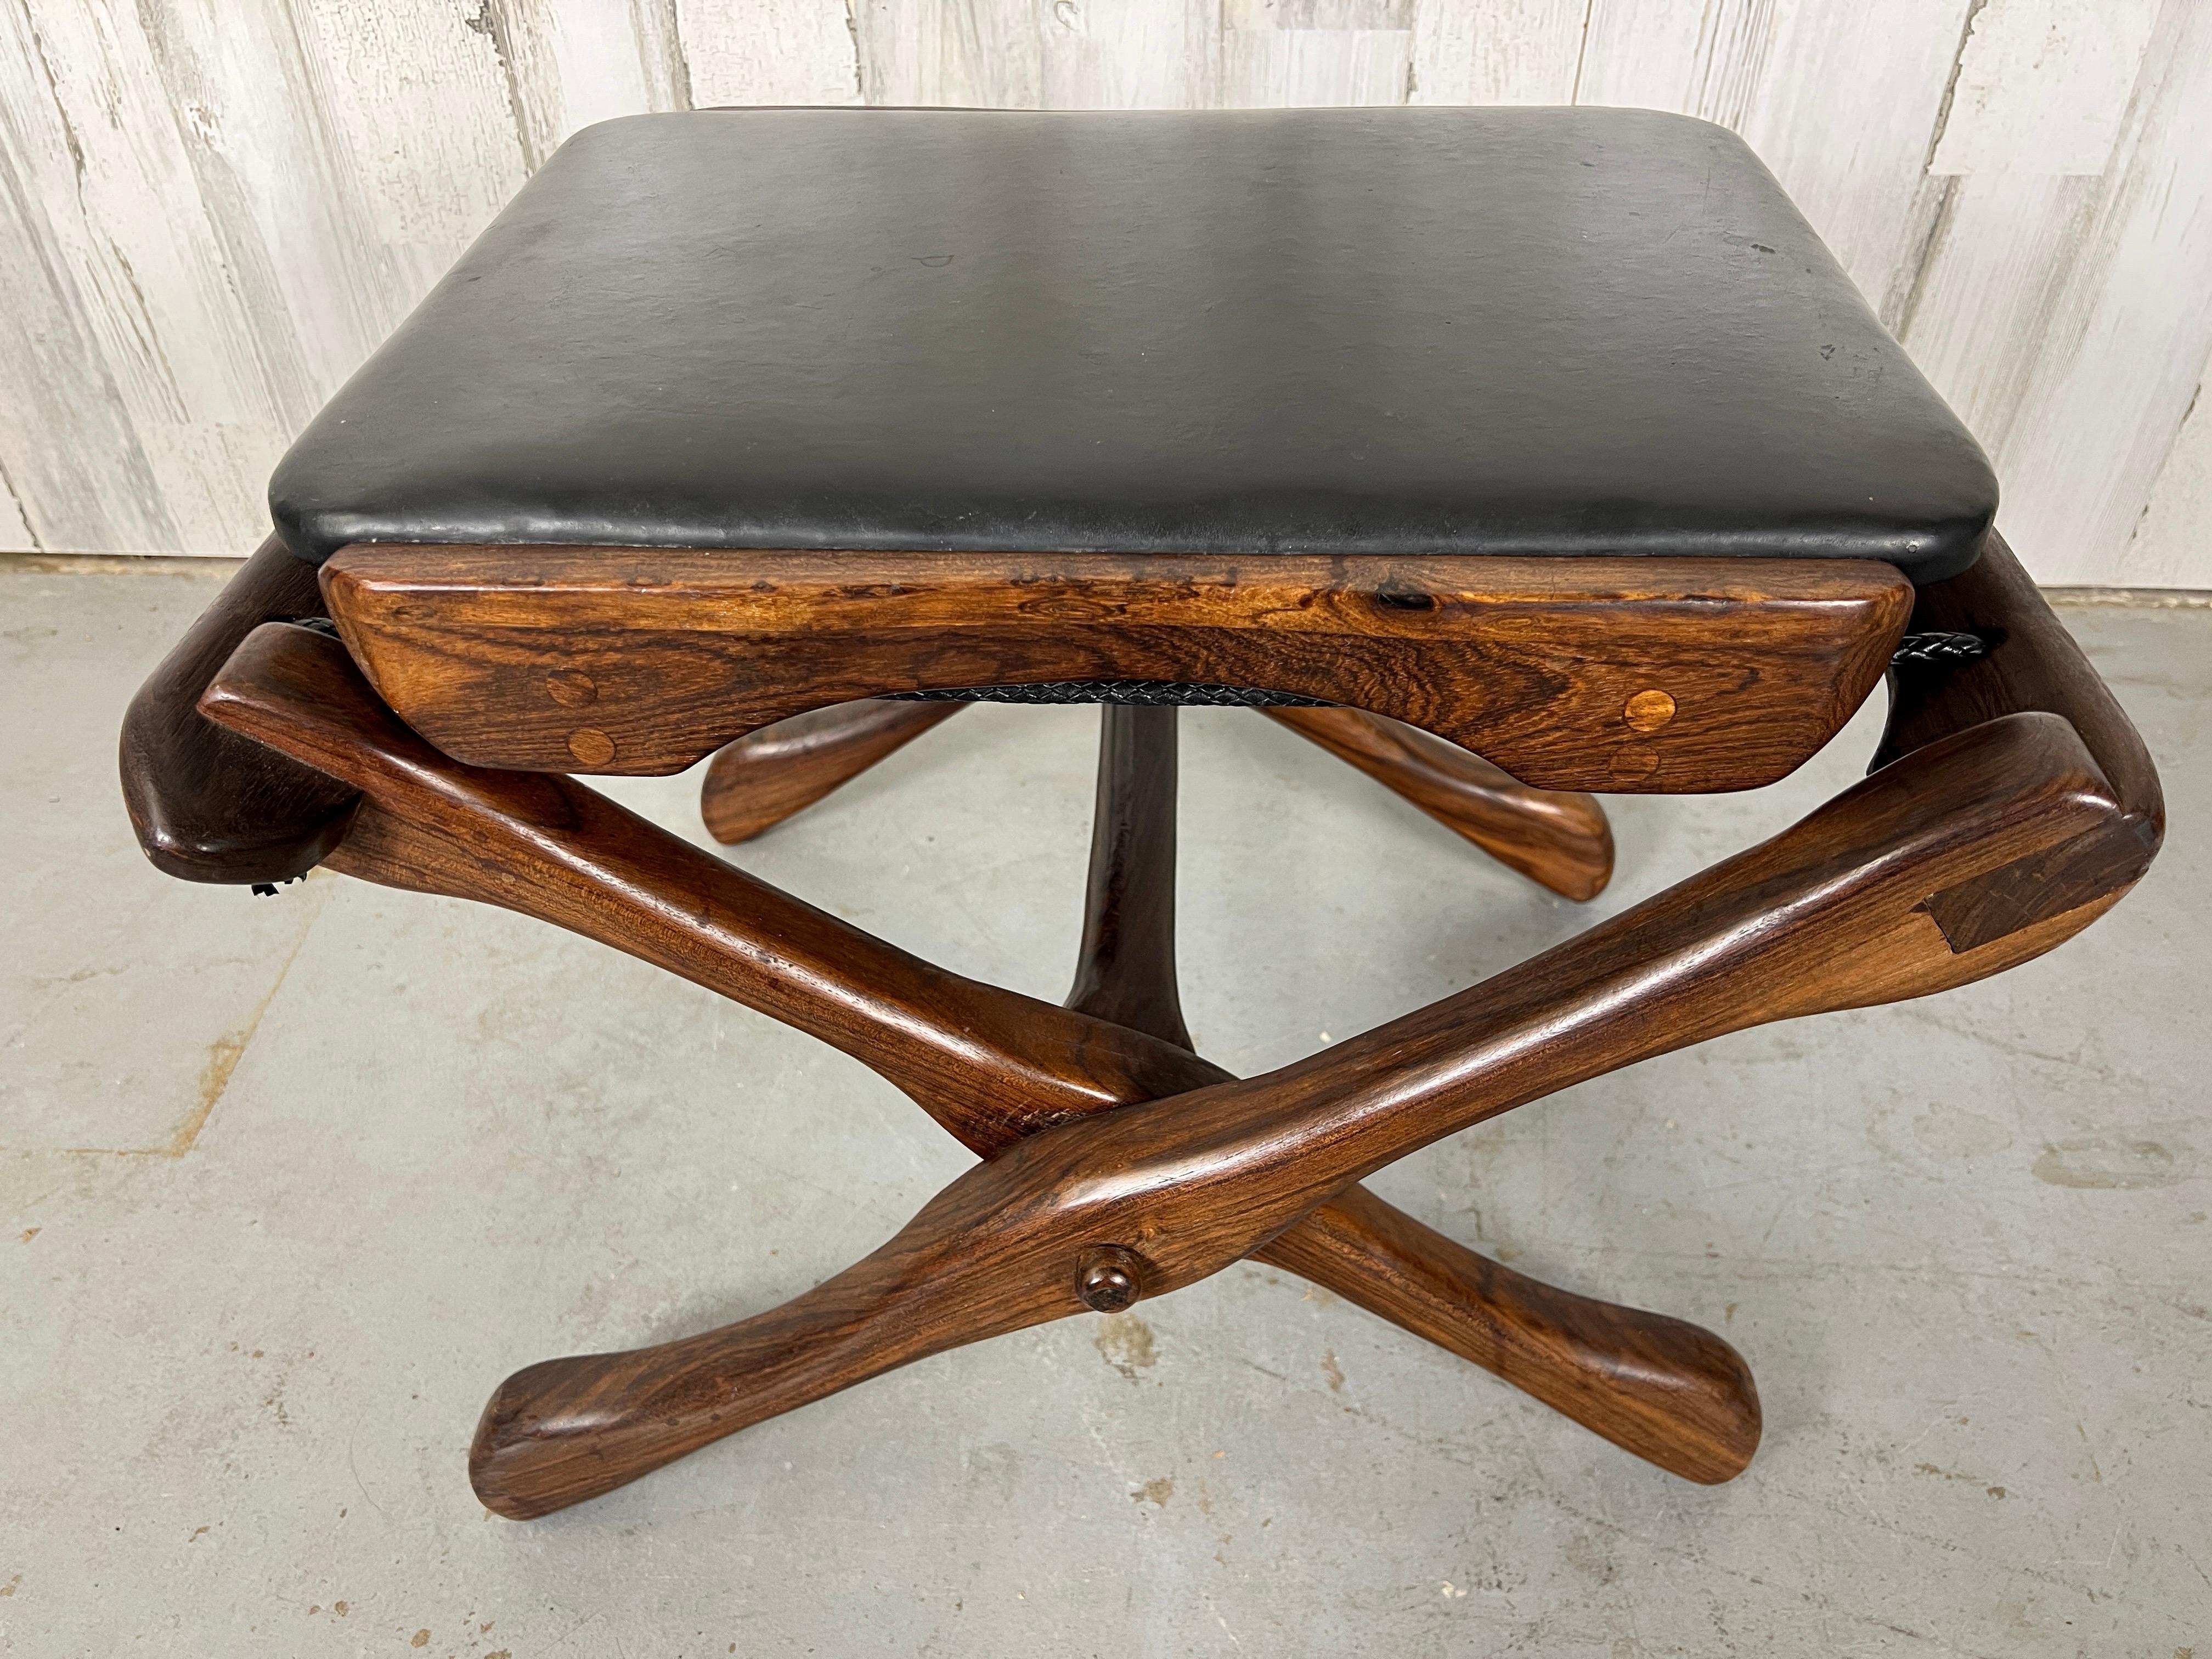 20th Century Don Shoemaker Folding Leather & Rosewood Stool for Señal Furniture